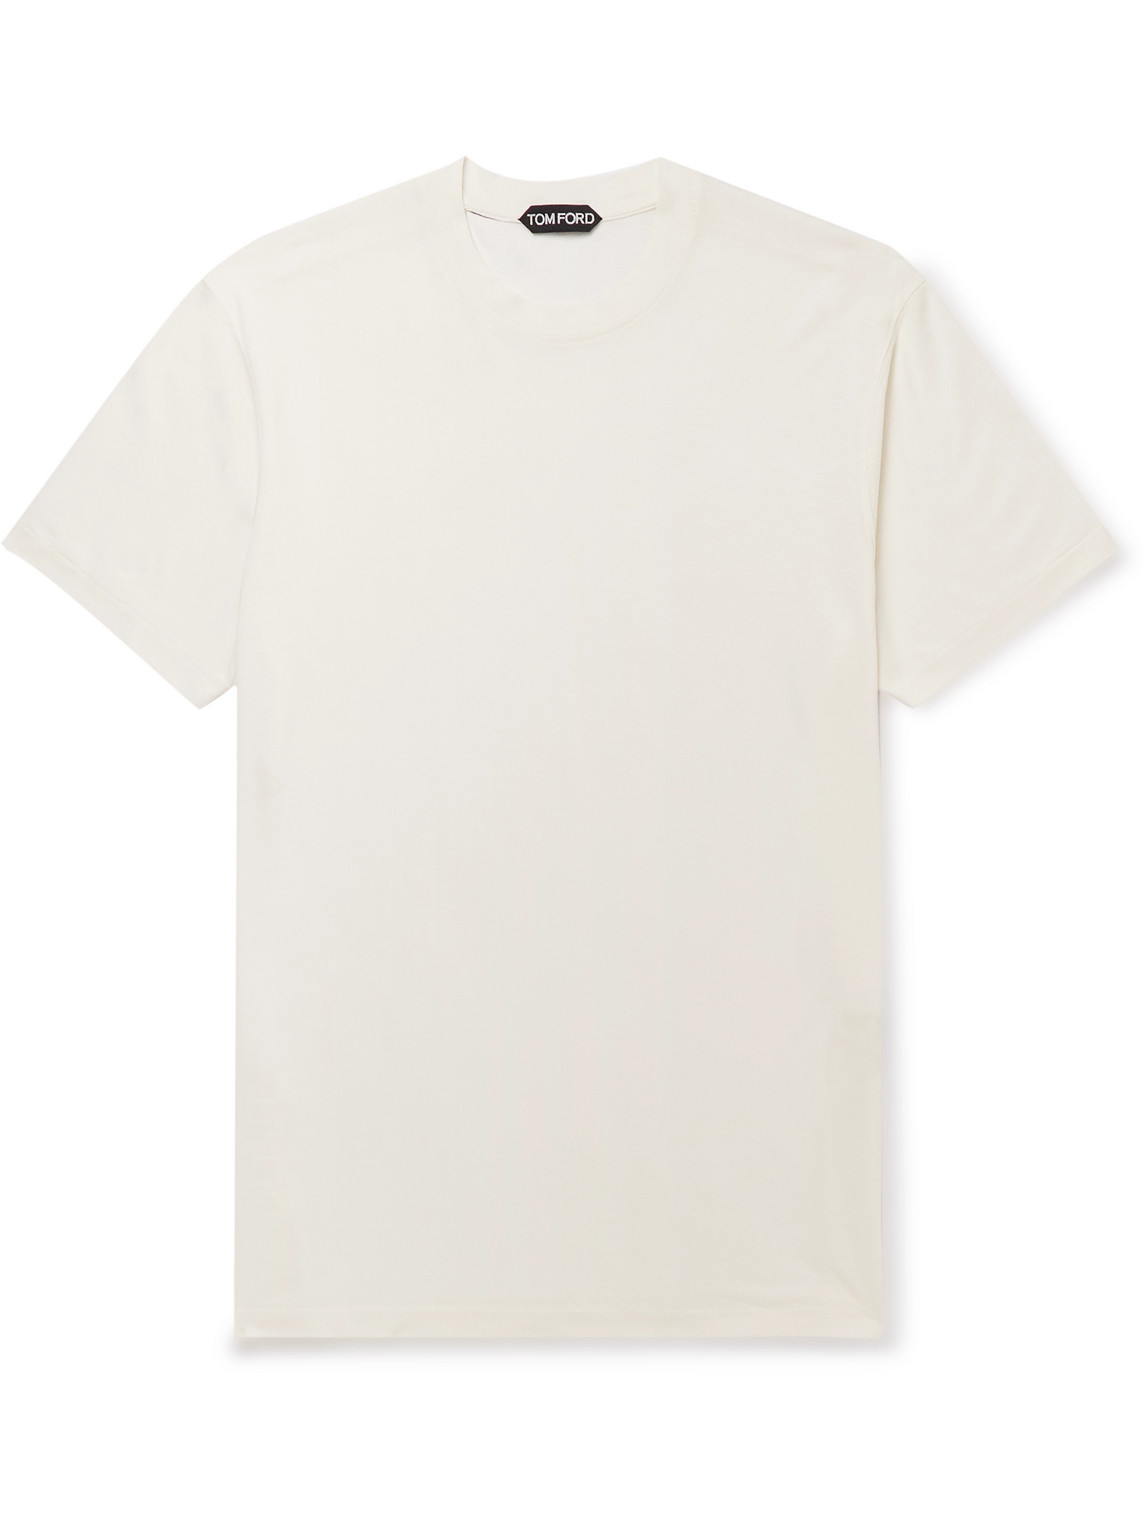 TOM FORD - Lyocell and Cotton-Blend Jersey T-Shirt - Men - White - IT 58 von TOM FORD